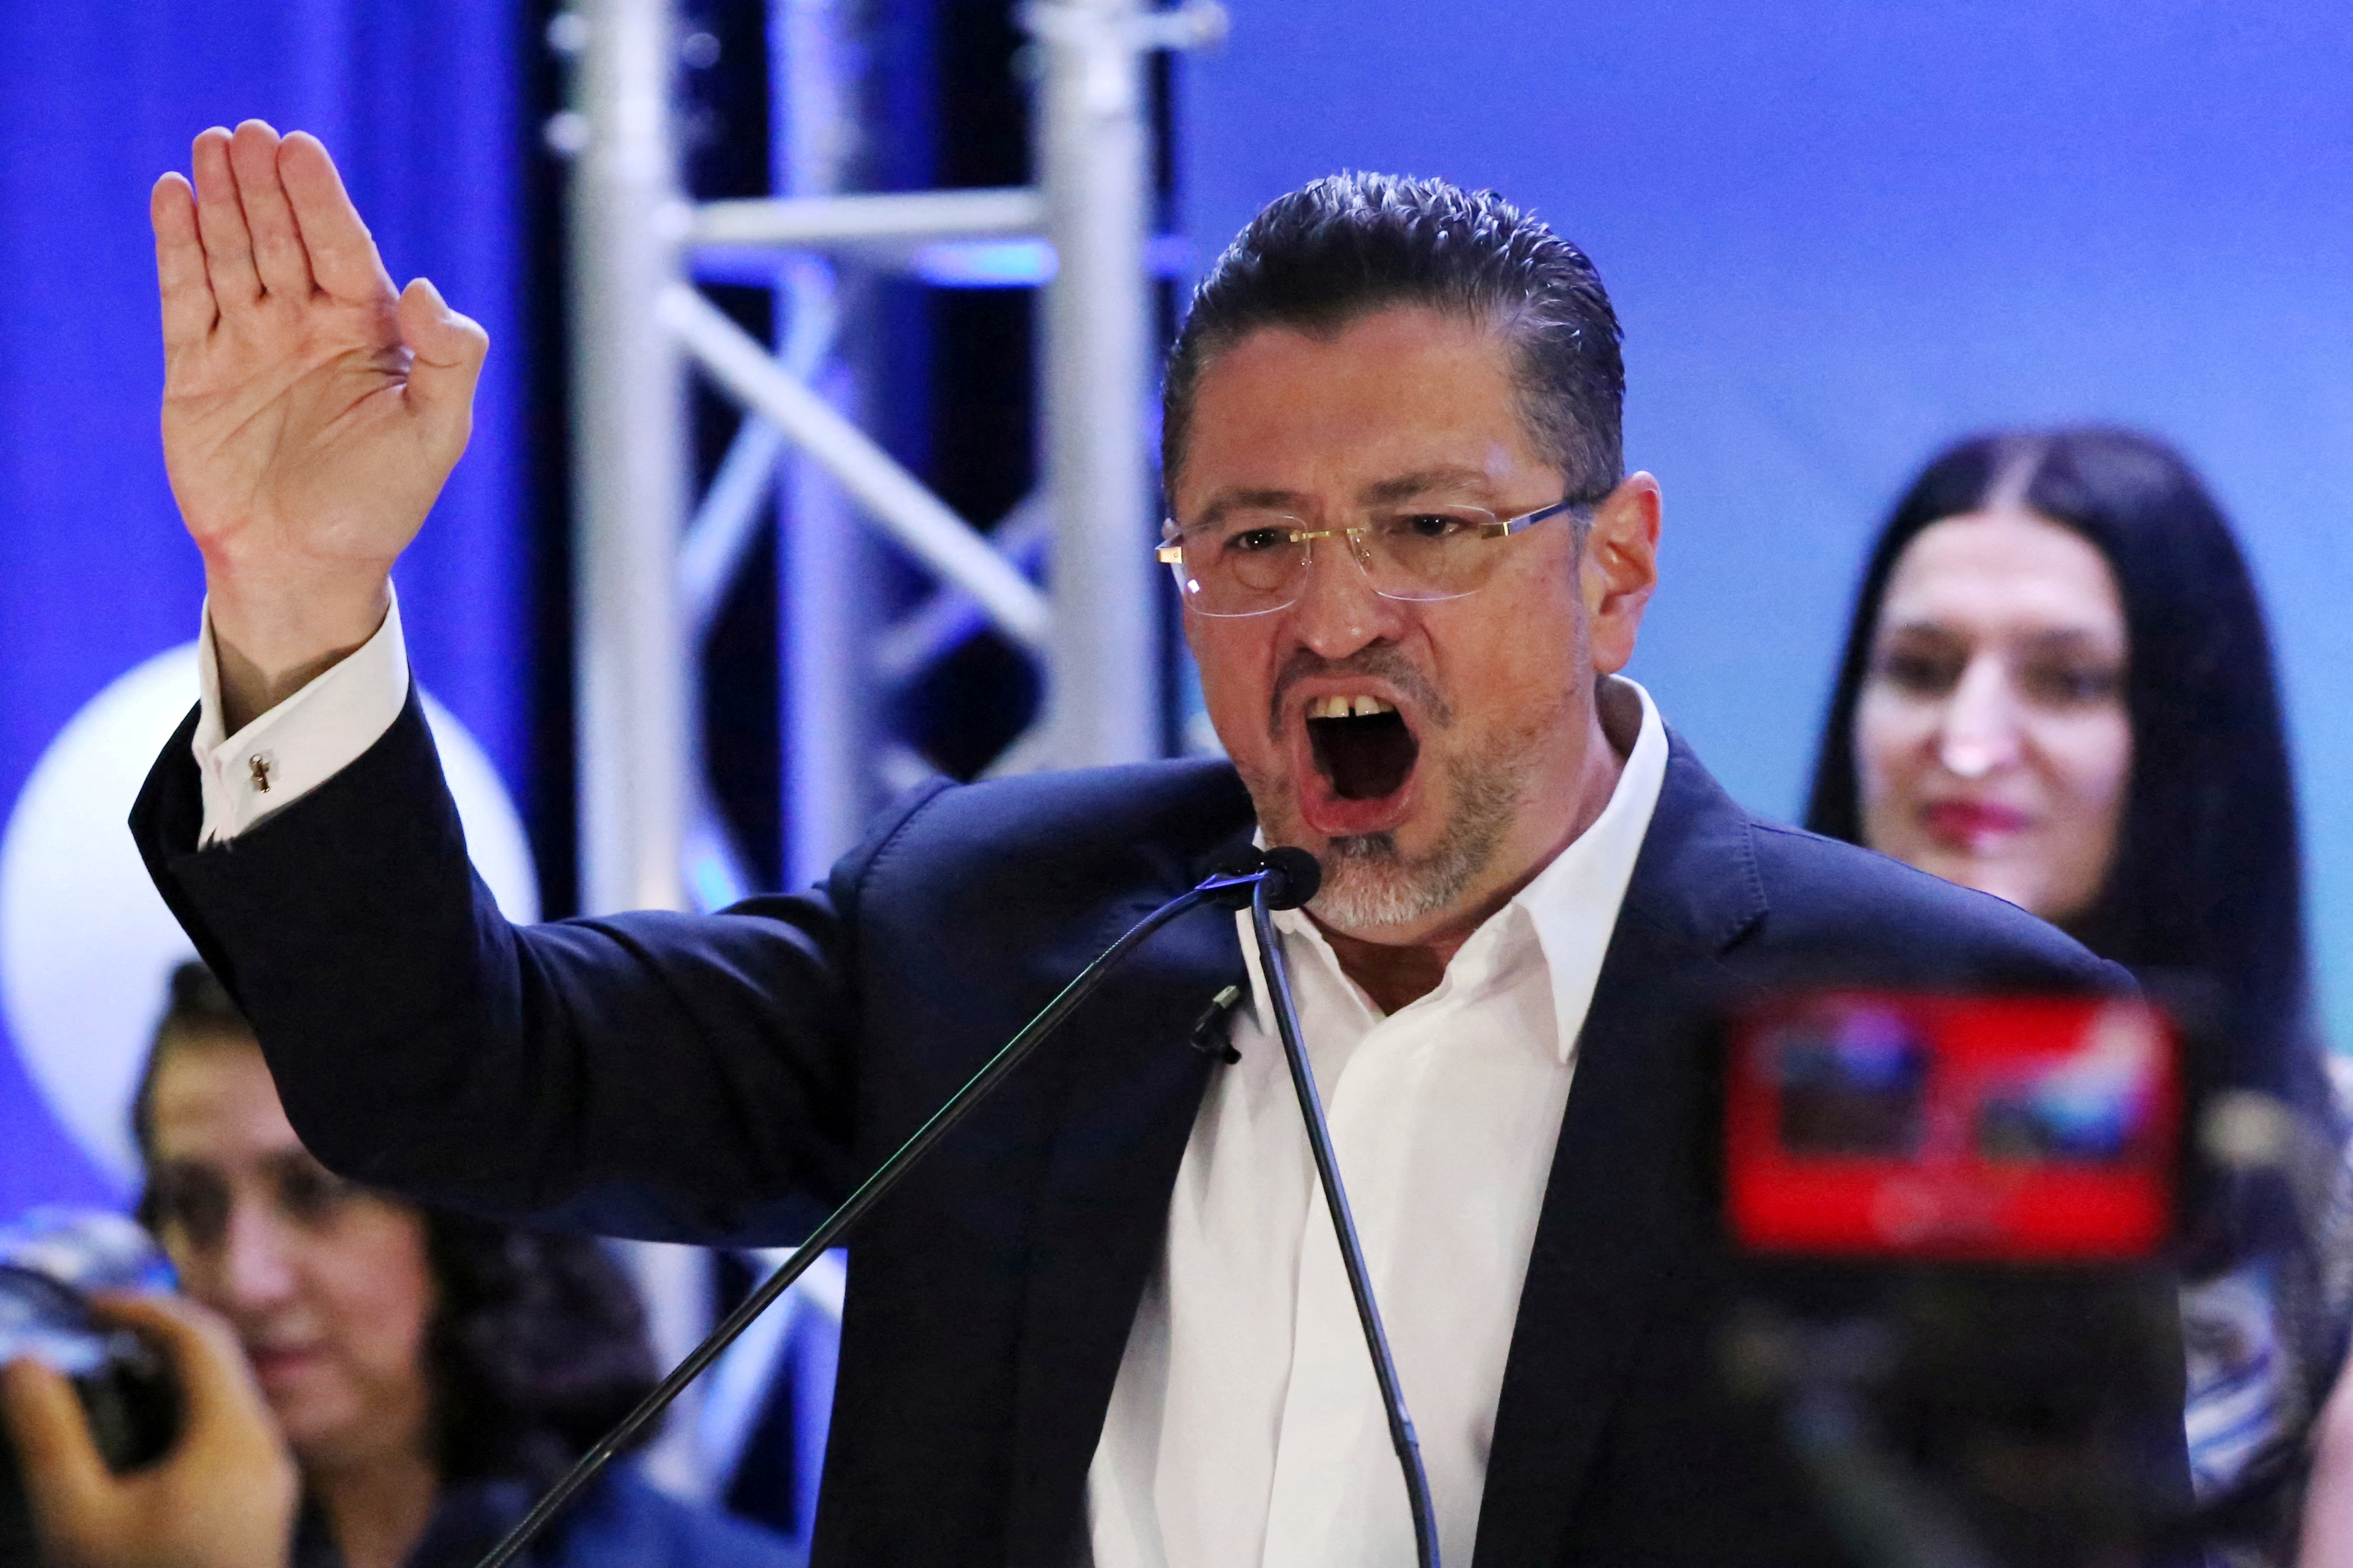 Chaves speaks after winning Costa Rican presidency in run-off election